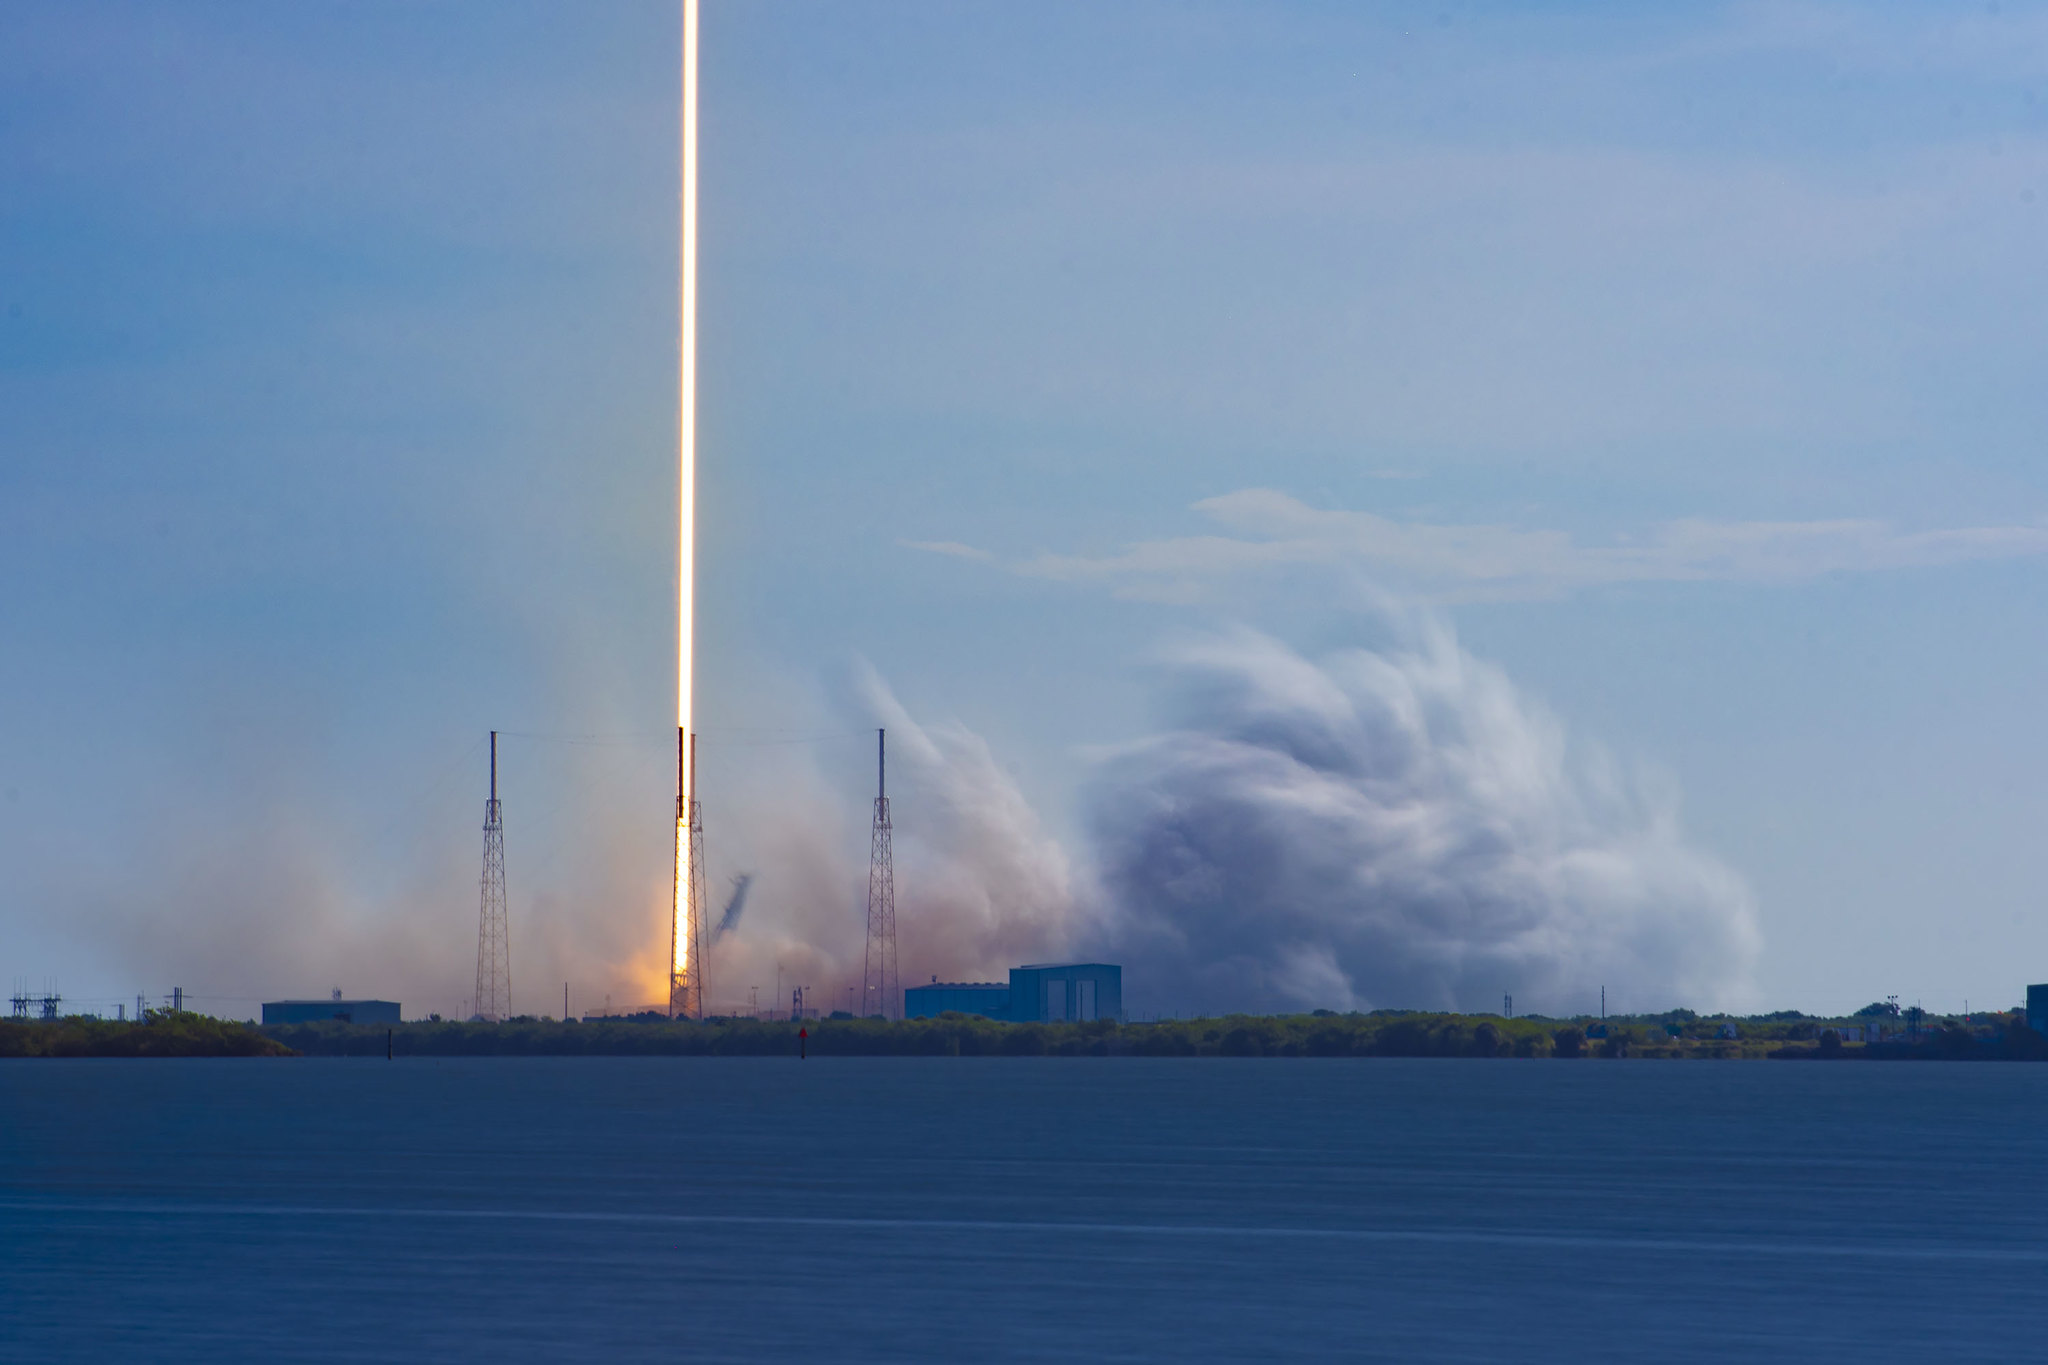 SpaceX rolls out new business line focused on military satellite services